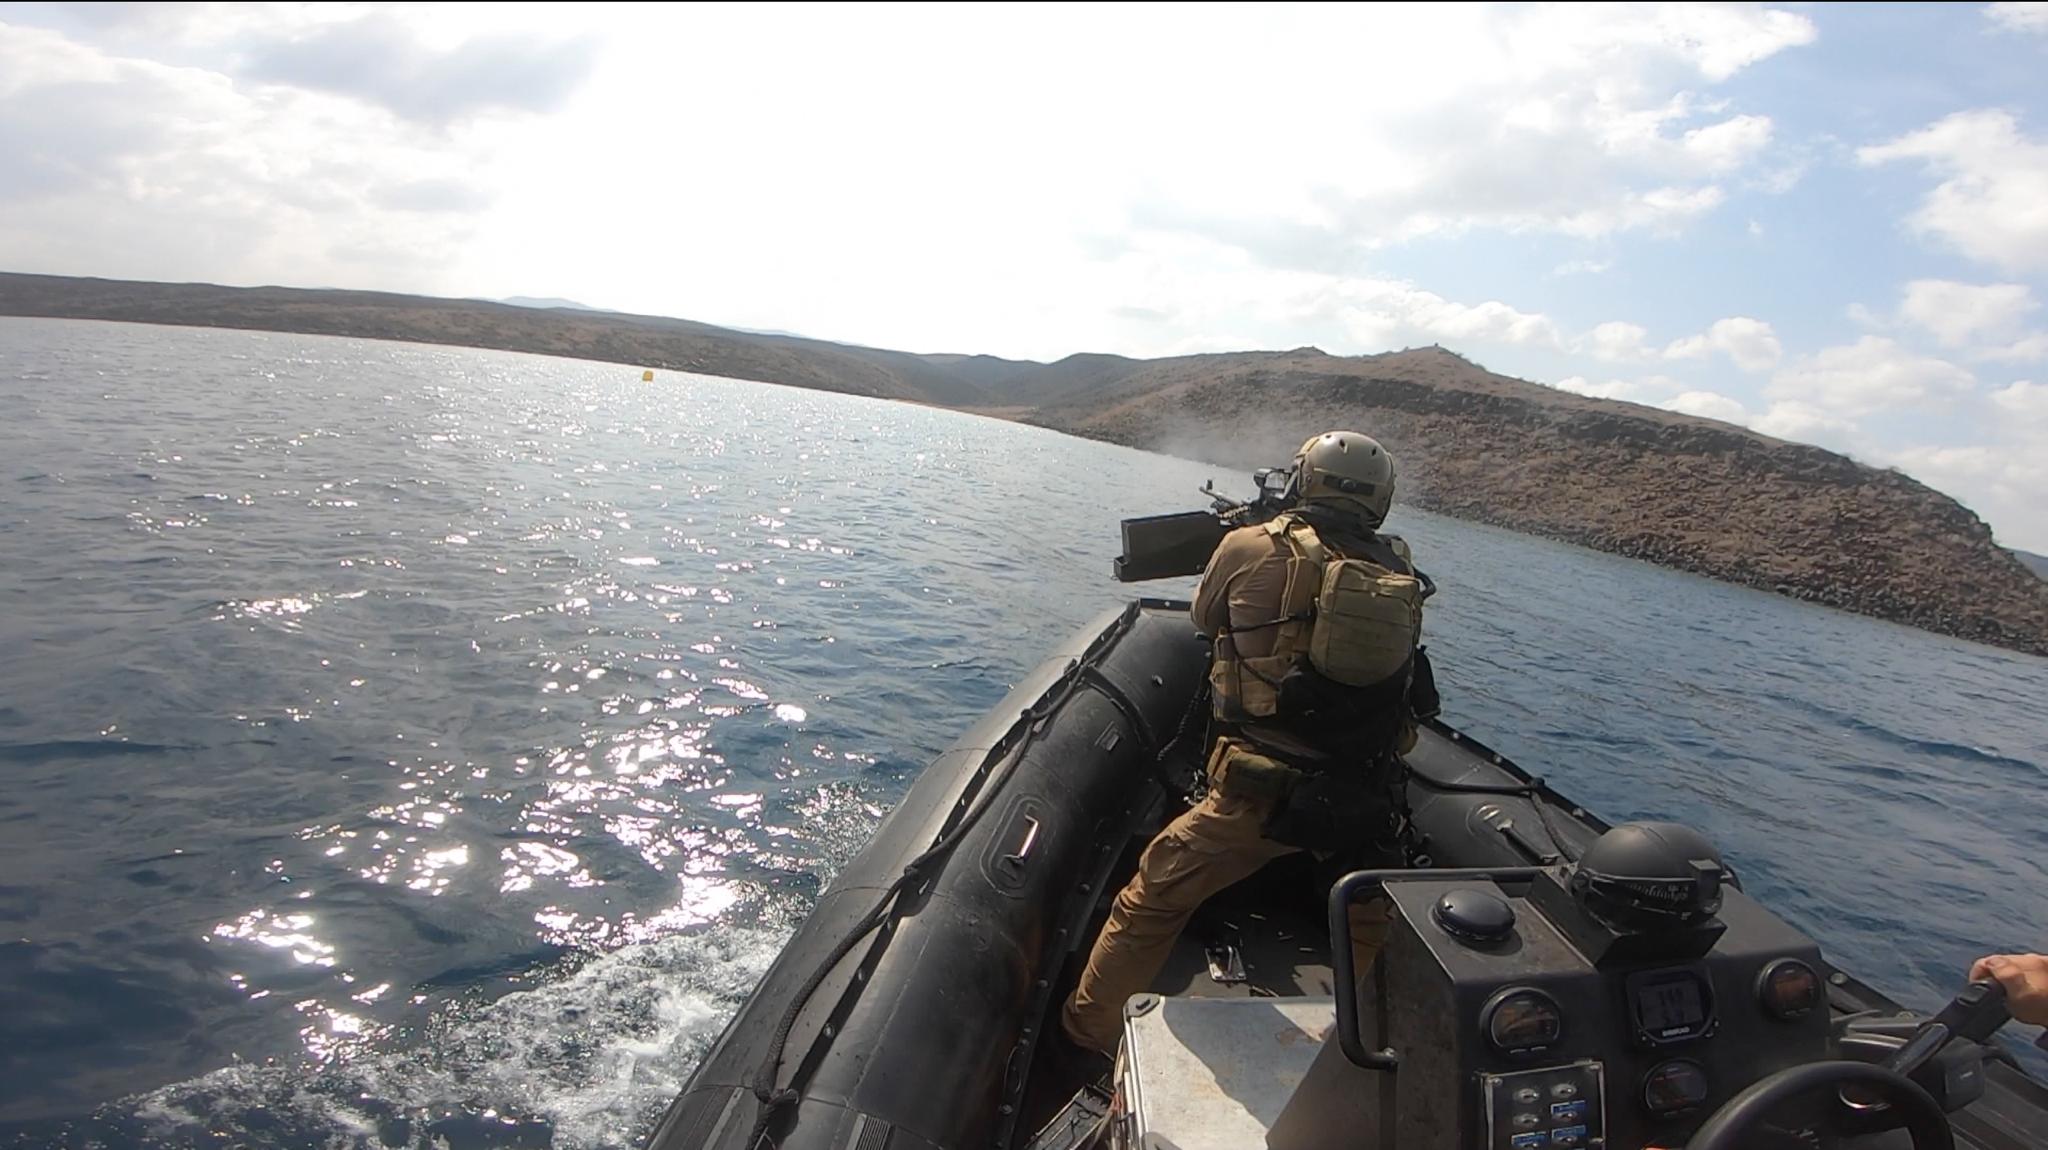 Operation ATALANTA crews on board the ESPS CANARIAS conduct exercises with French Forces in Djibouti in November 2019.